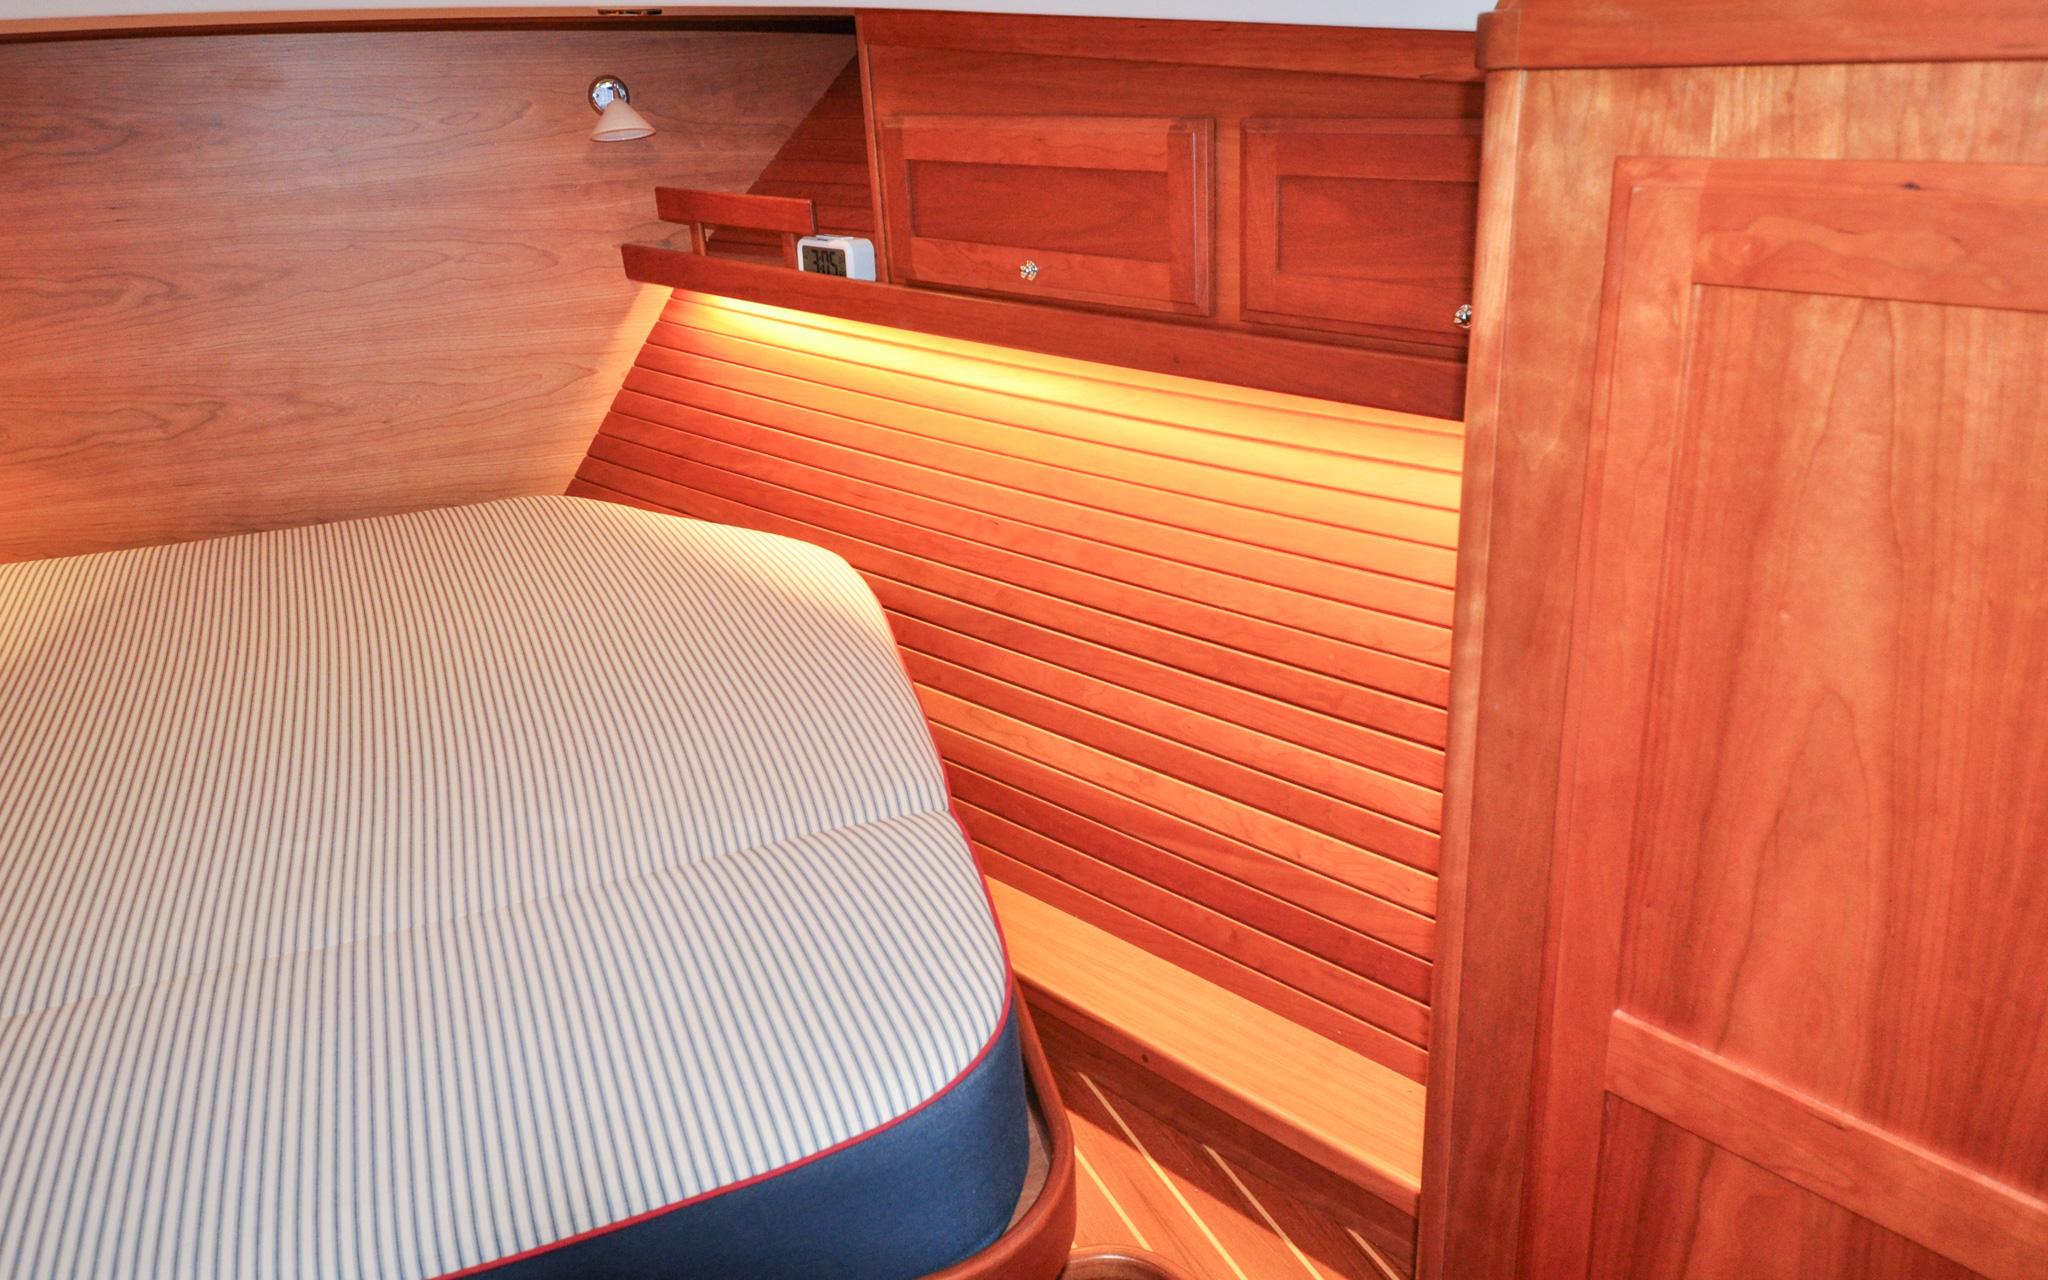 Sabre 38 Salon Express - Knot Done Yet - Owners Cabin